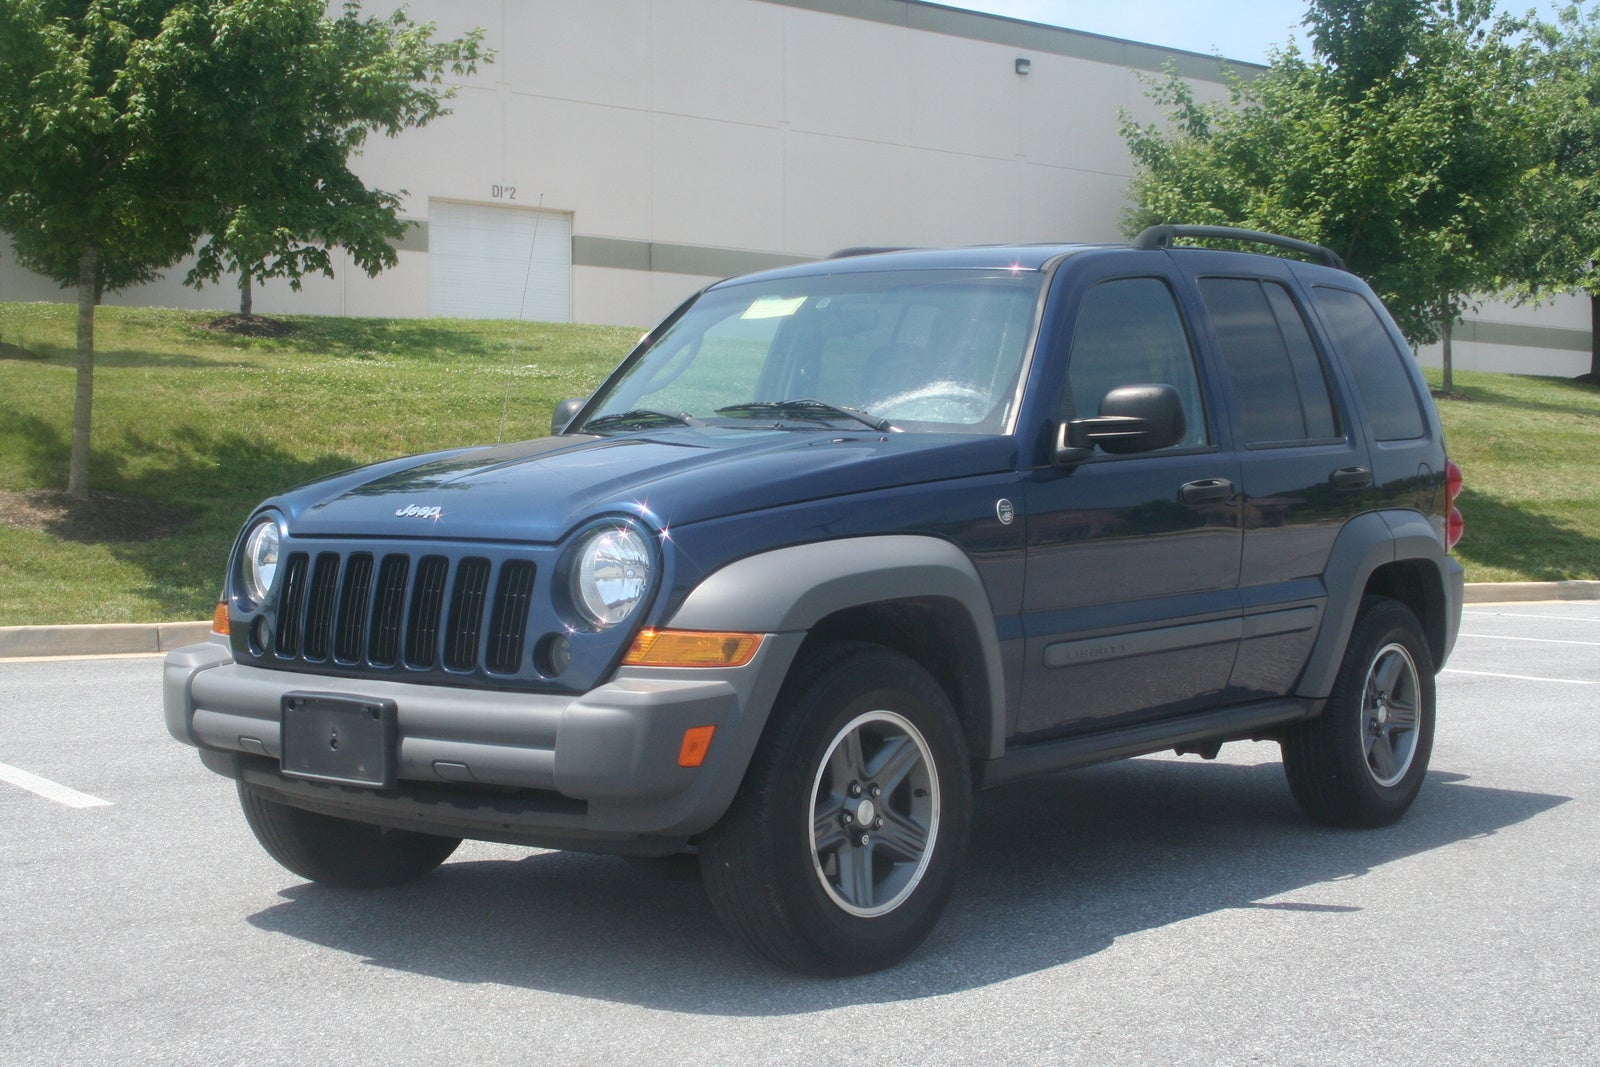 2005 Jeep liberty limited edition reviews #3